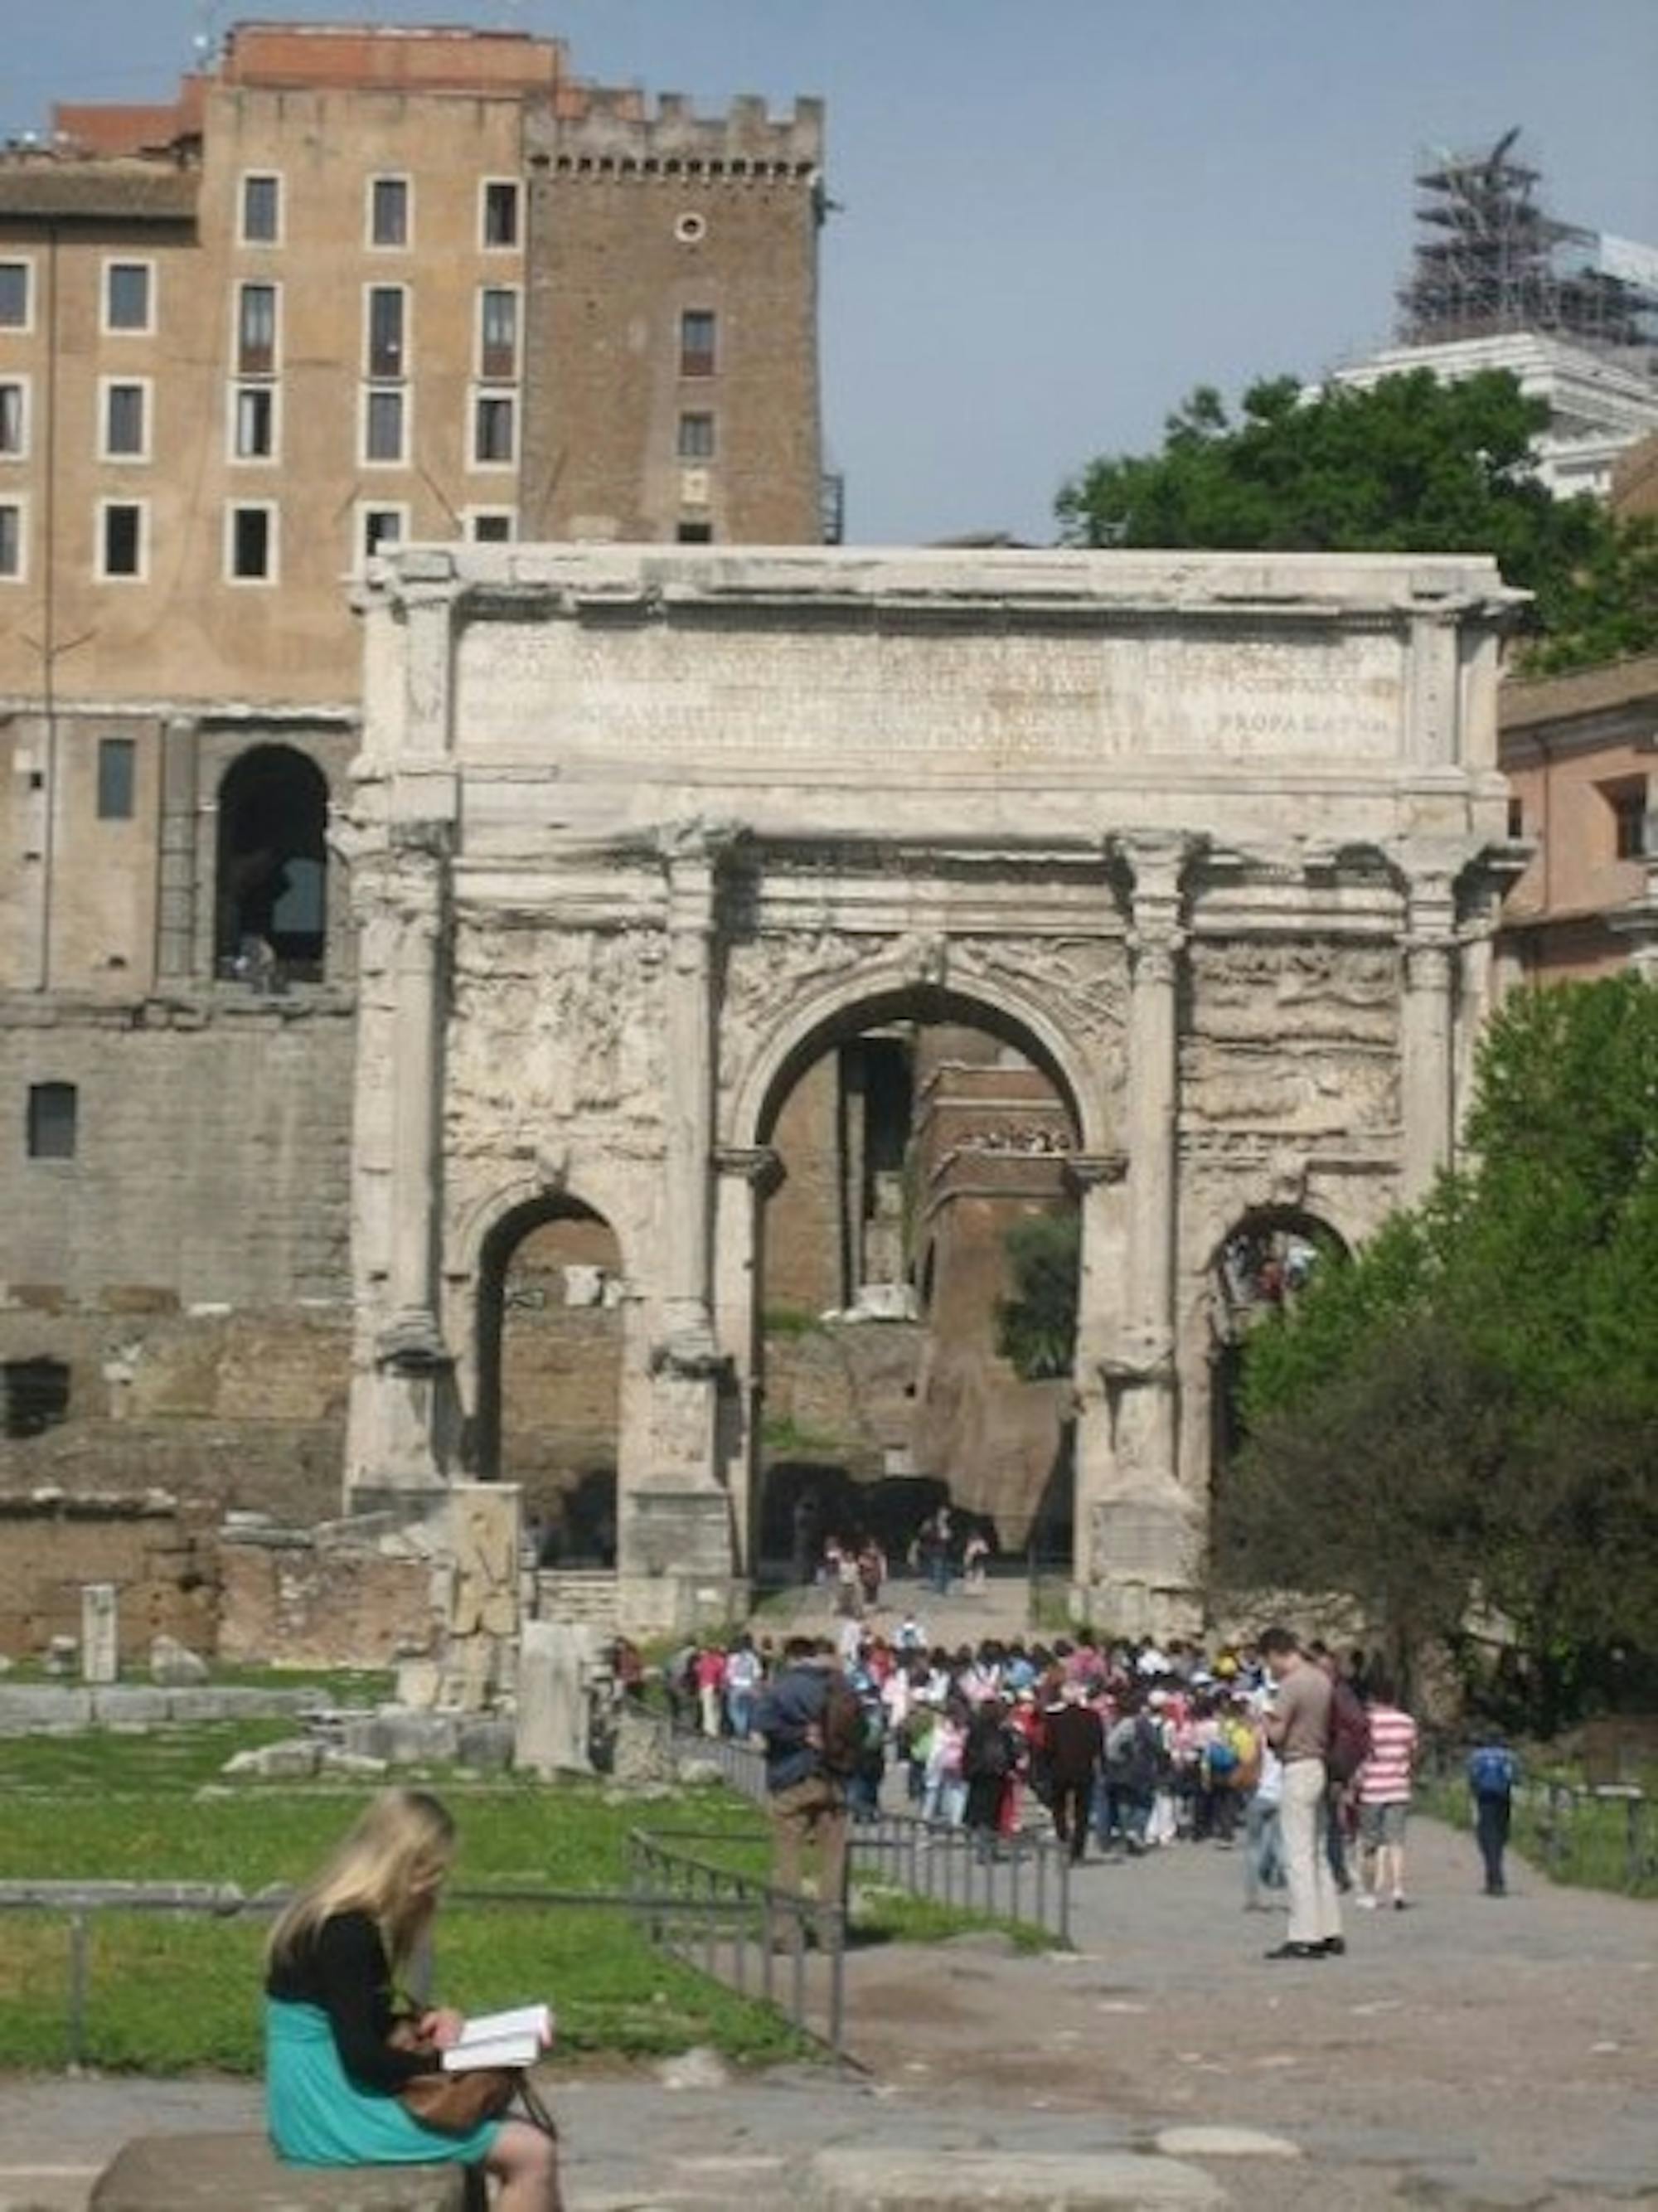 Students flock to the Roman forum at the foot of the Capitoline to admire the Arch of Septimius Severus and other ancient art.